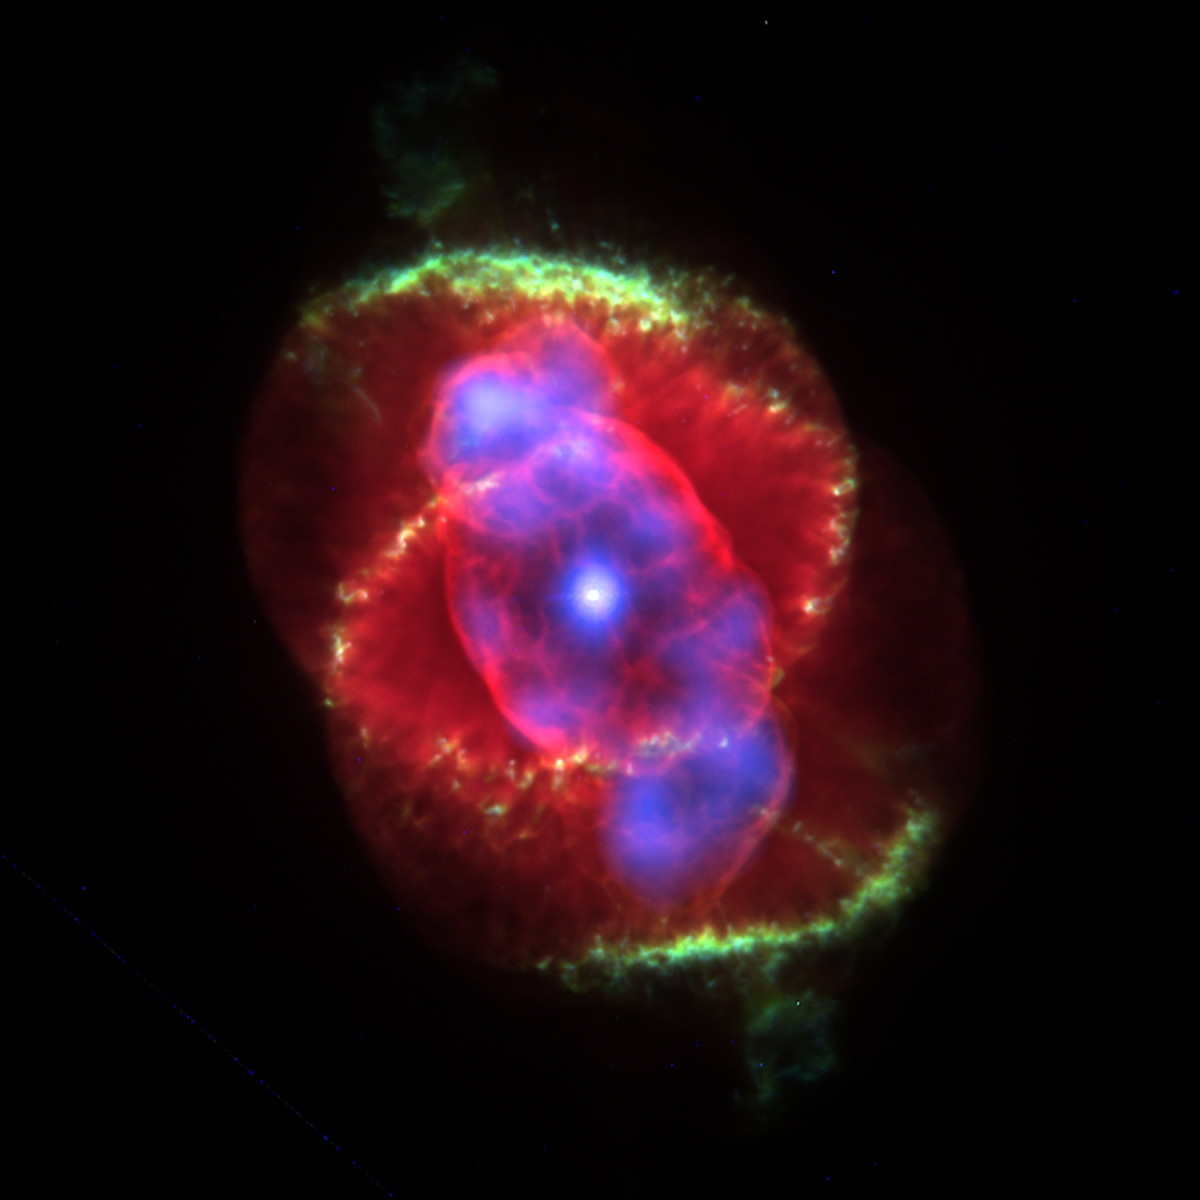 This is a composite image using optical images from the Hubble Space Telescope and X-ray data from the Chandra X-ray Observatory in 1995.